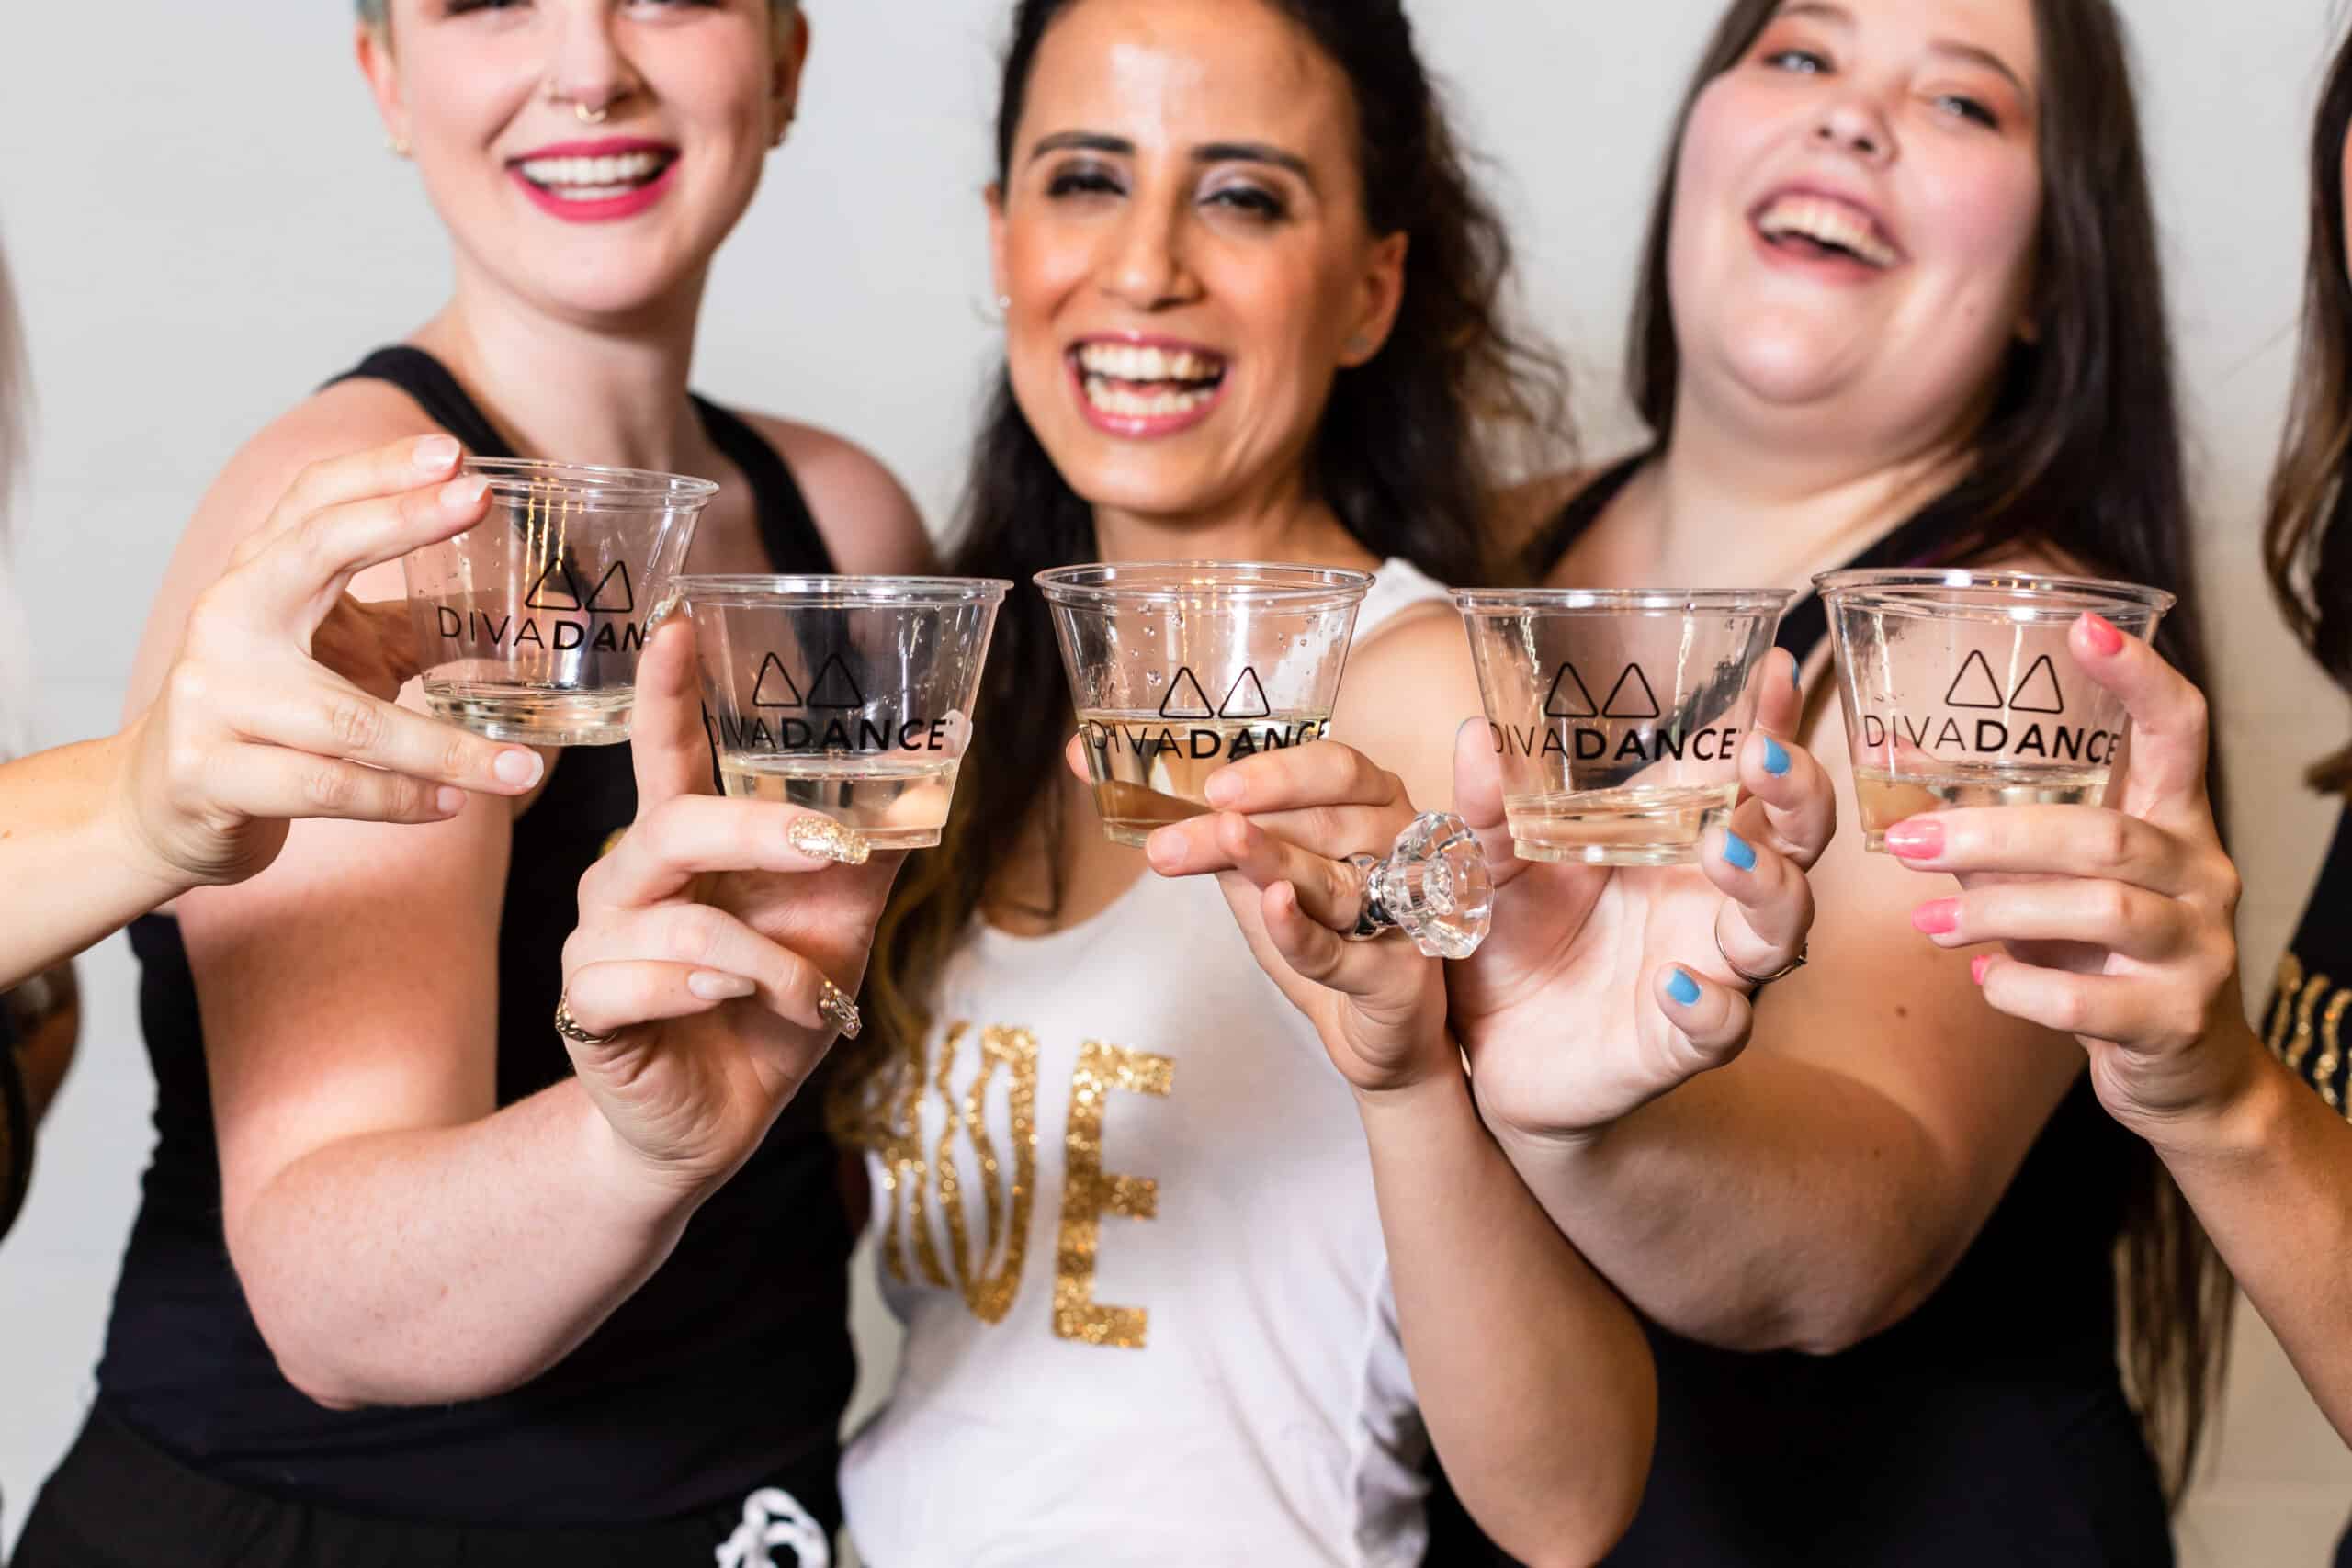 A group of women posing for a photo with wine glasses.